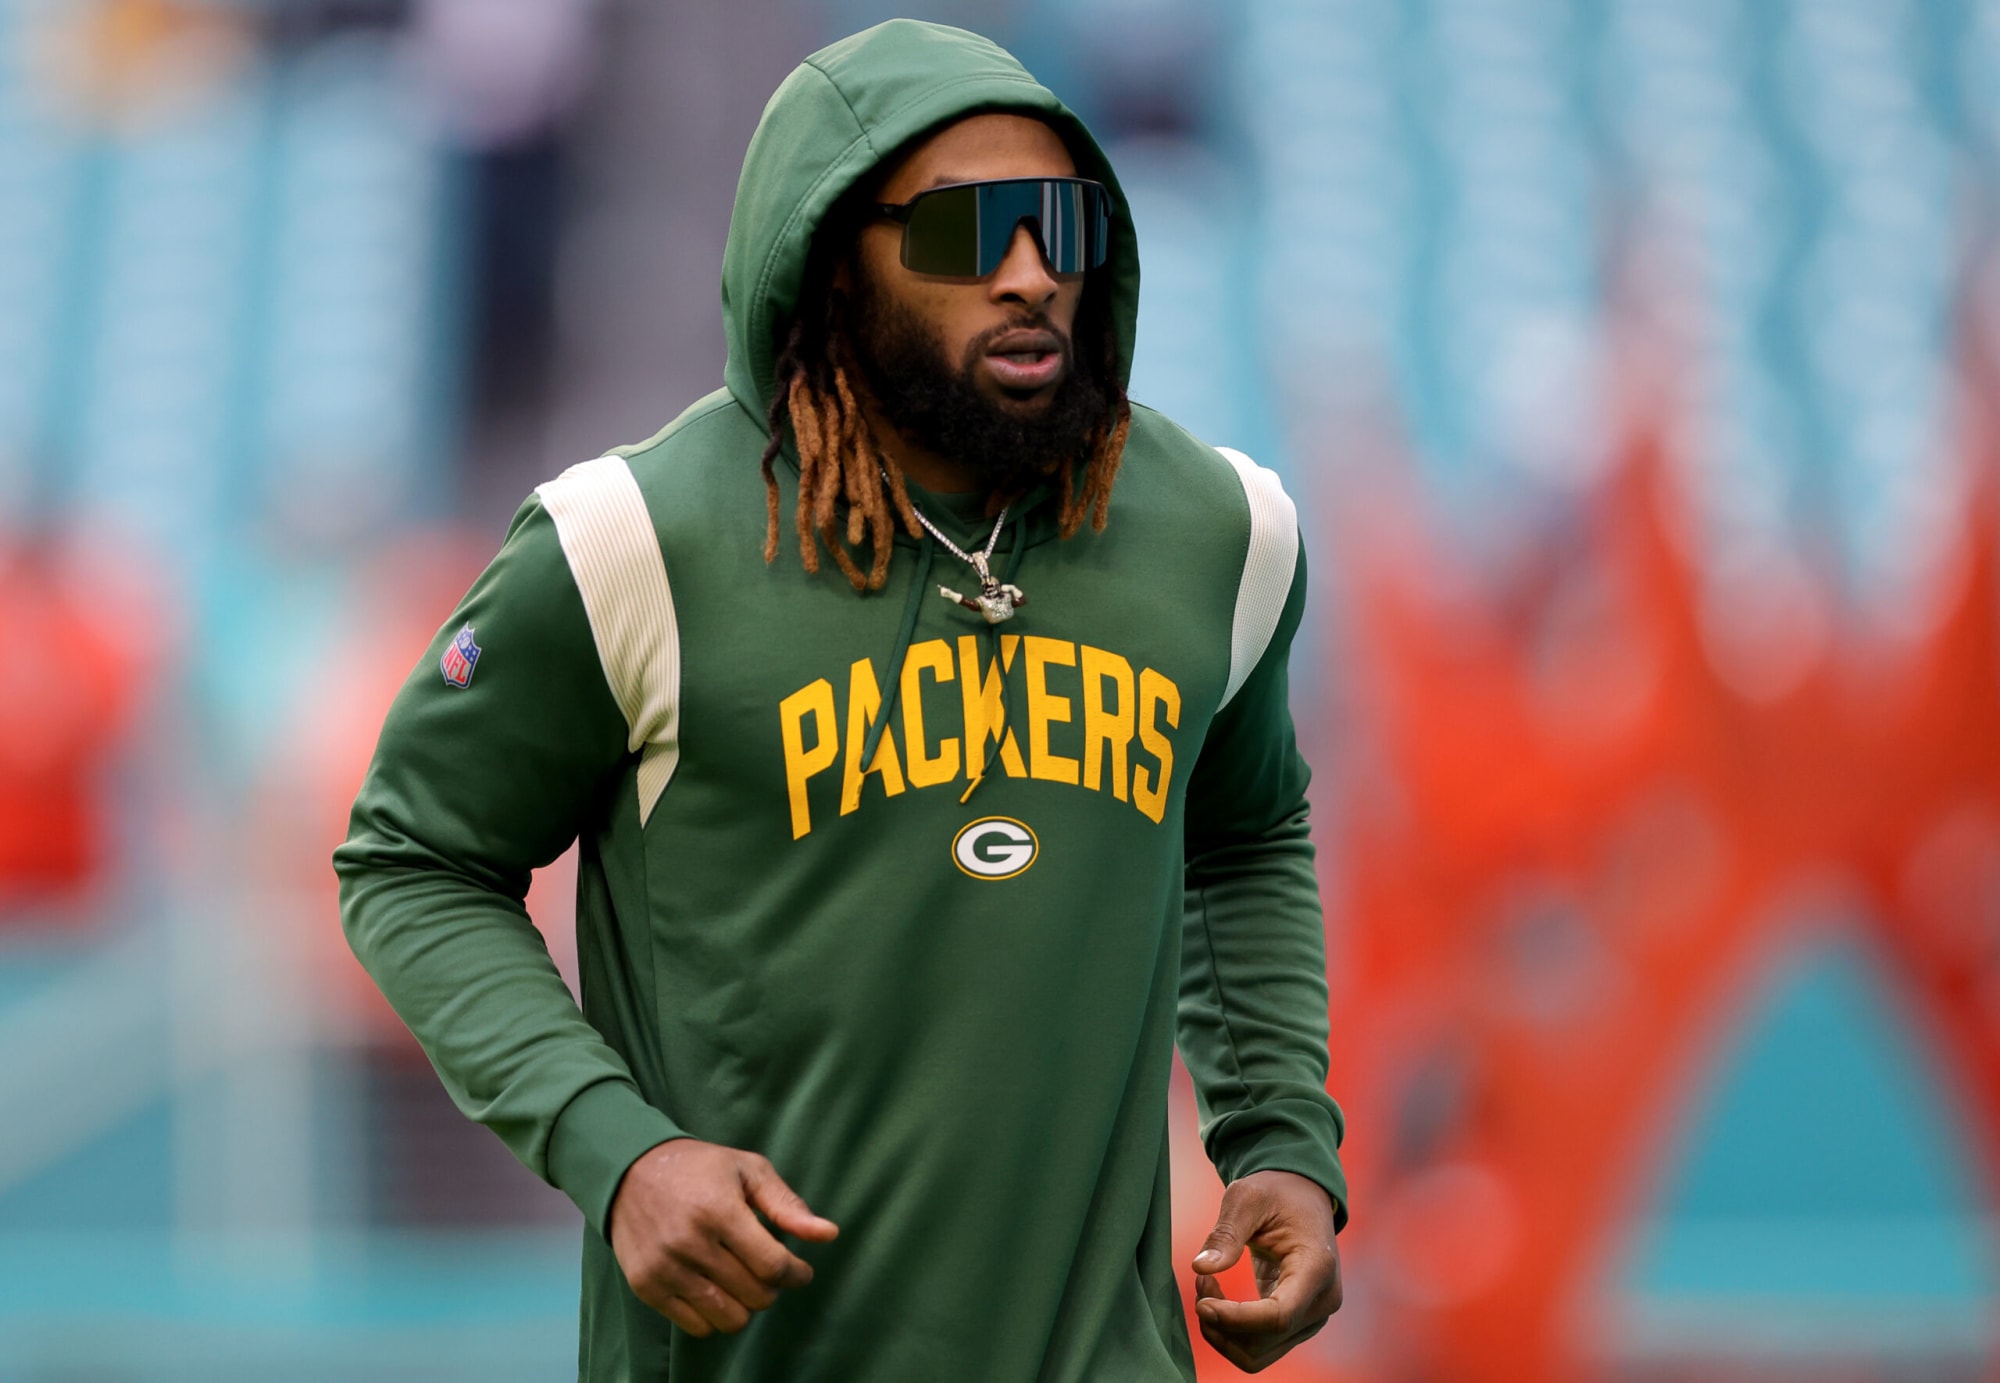 Aaron Jones wants to prove Packers haters wrong after Rodgers trade